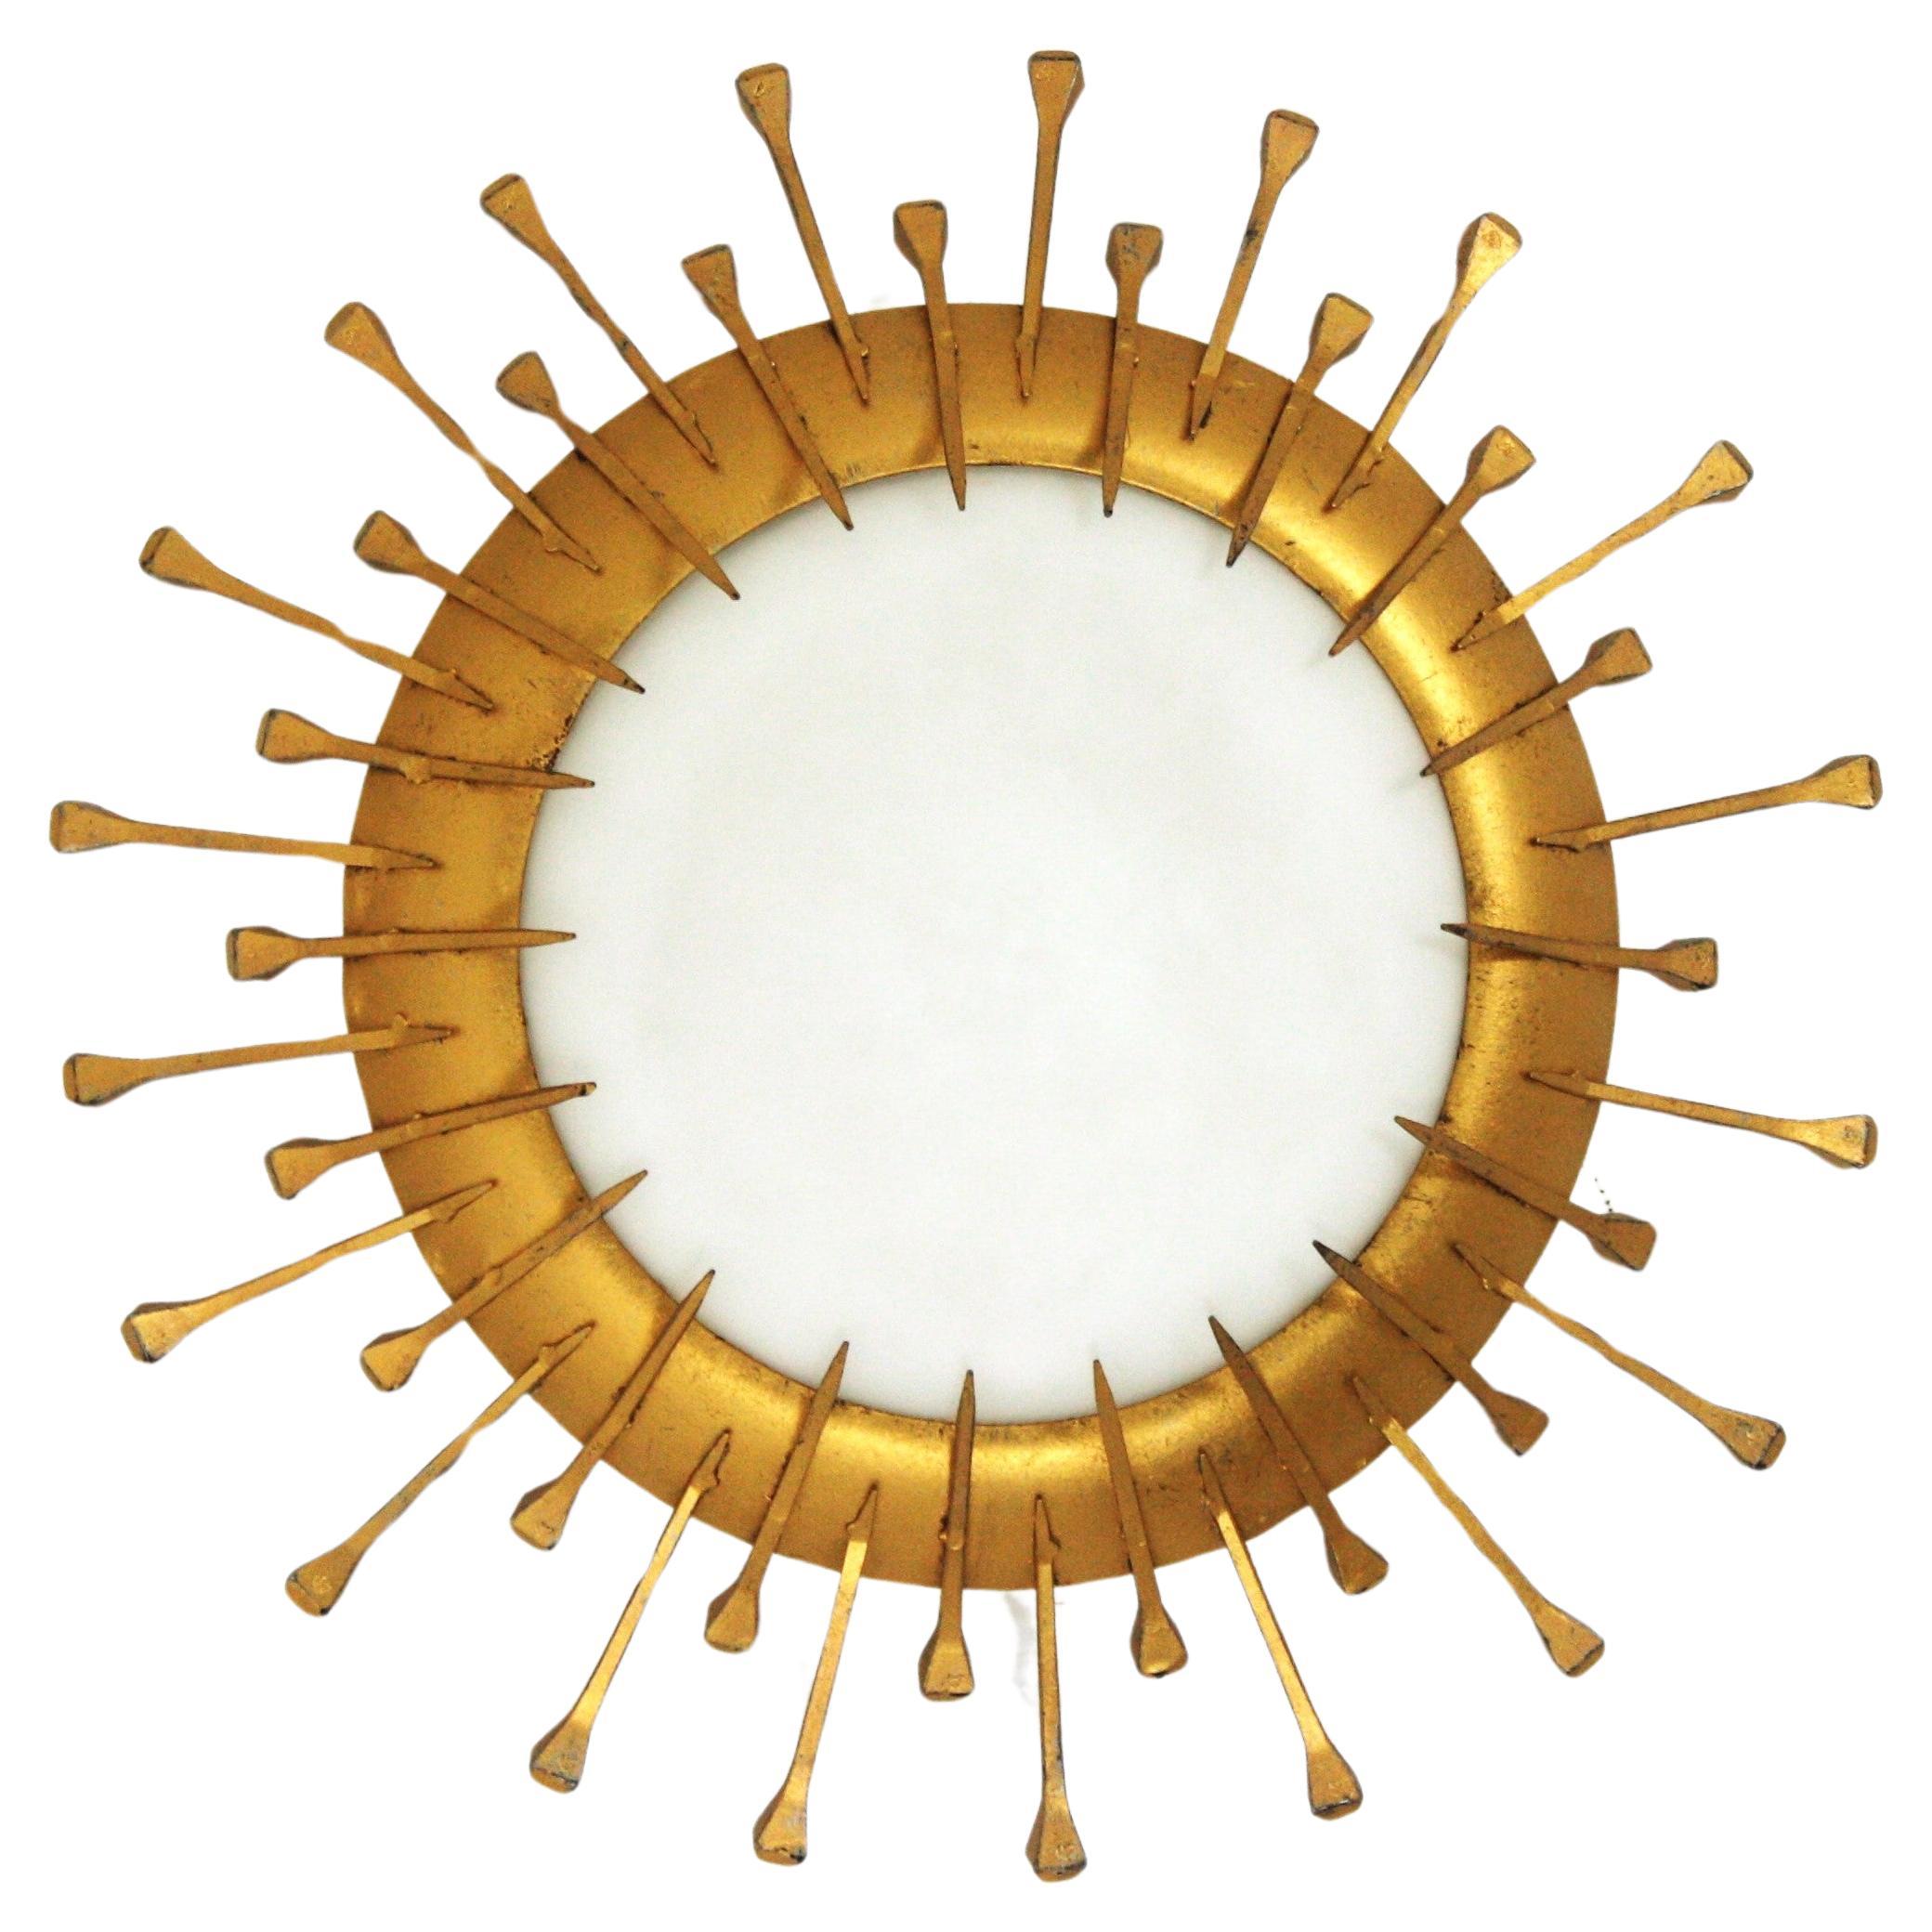 Eye-catching hand-hammered iron and opaline glass sunburst flush mount / wall light. France, 1940s-1950s.
This sunburst light fixture features two layers of alternating short and long nail decoration and gilt finish. Style in transition from Art